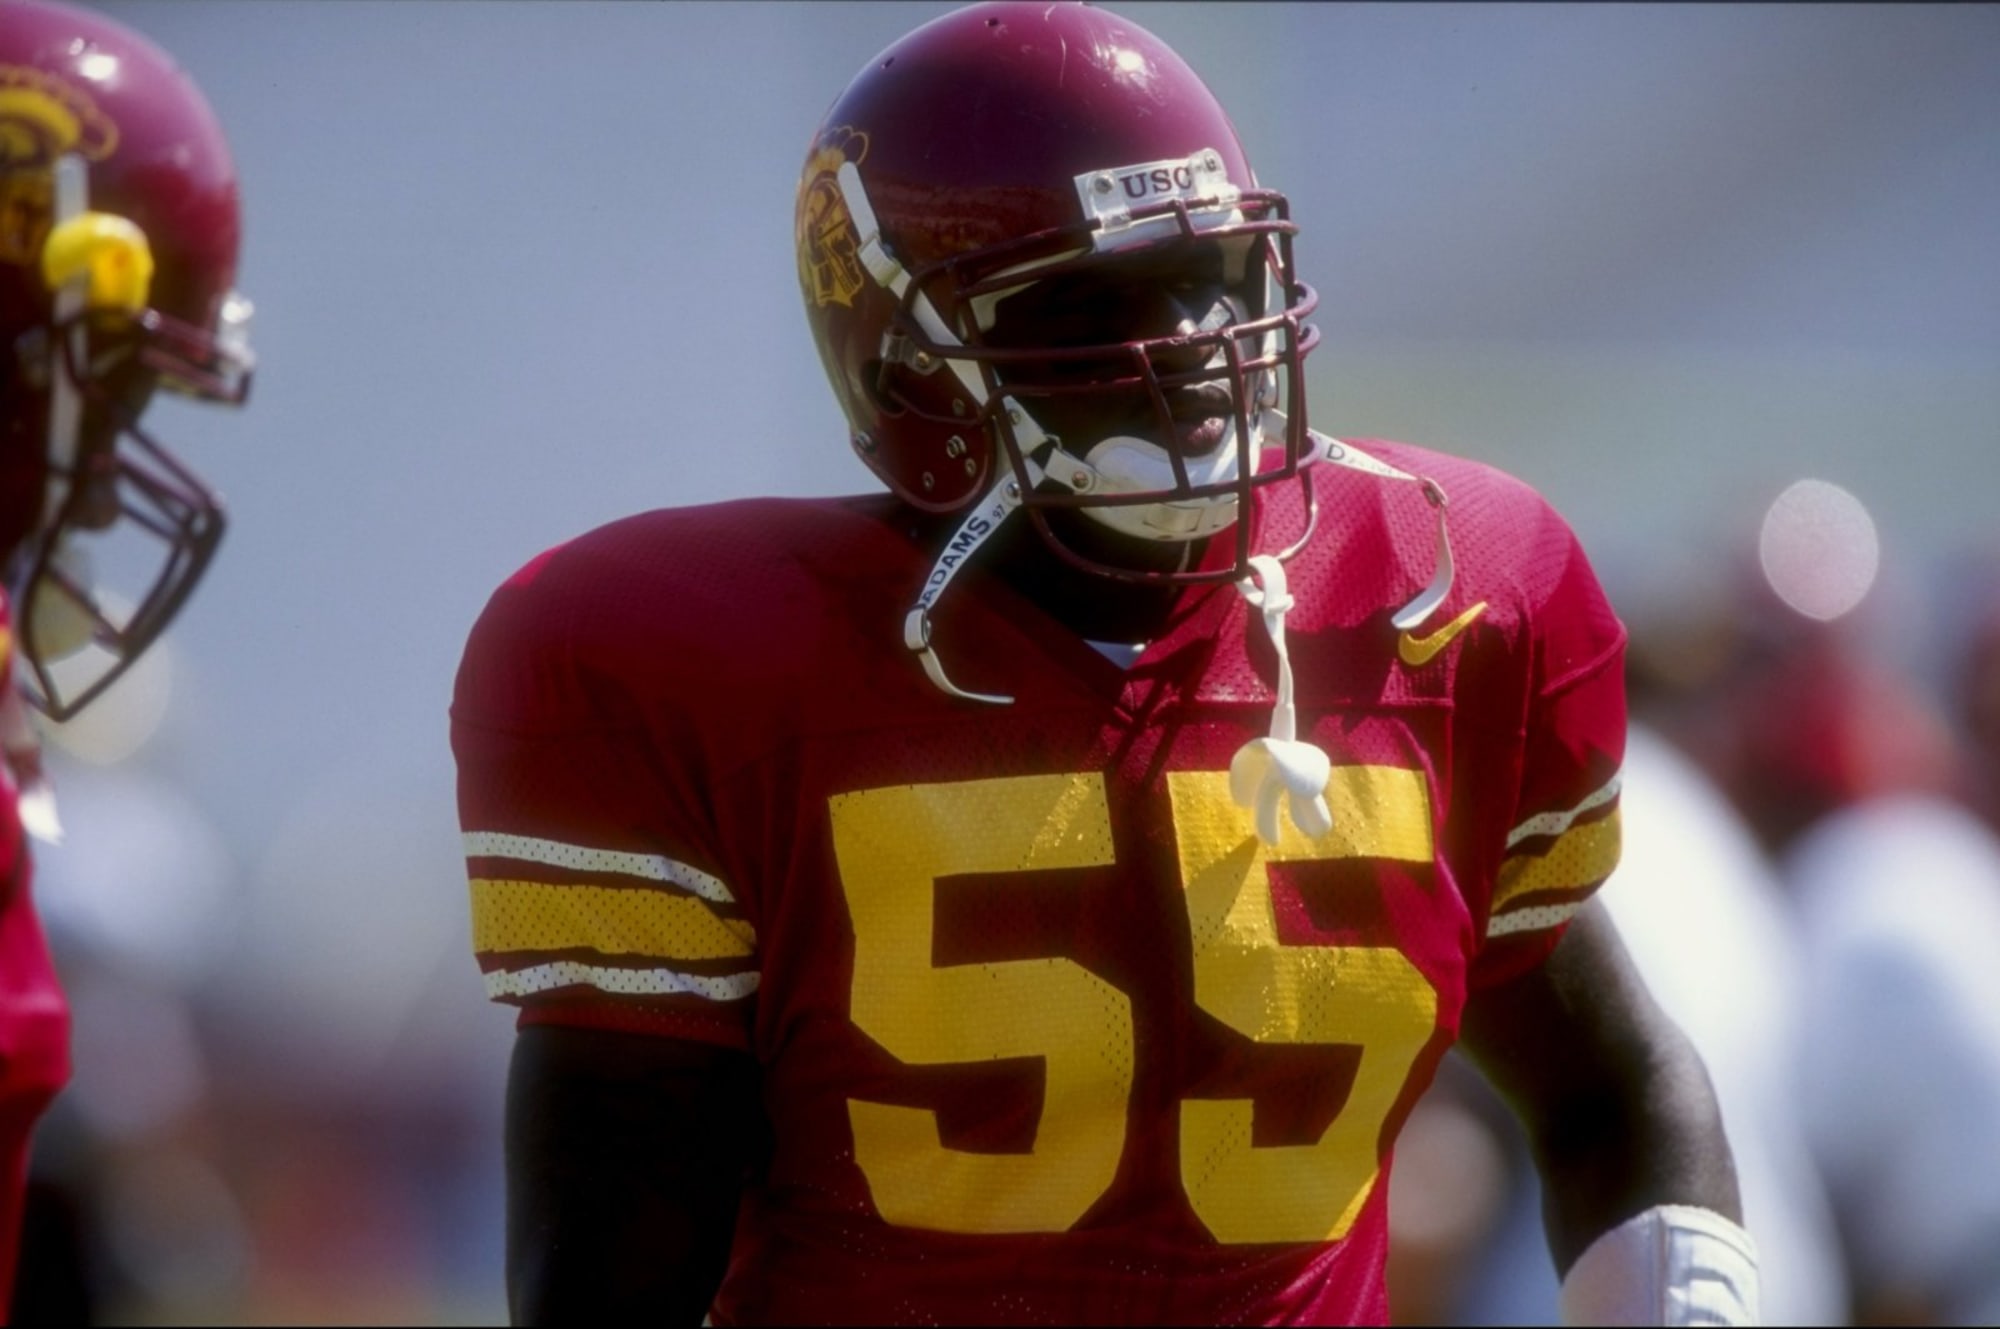 USC football's most iconic jersey numbers